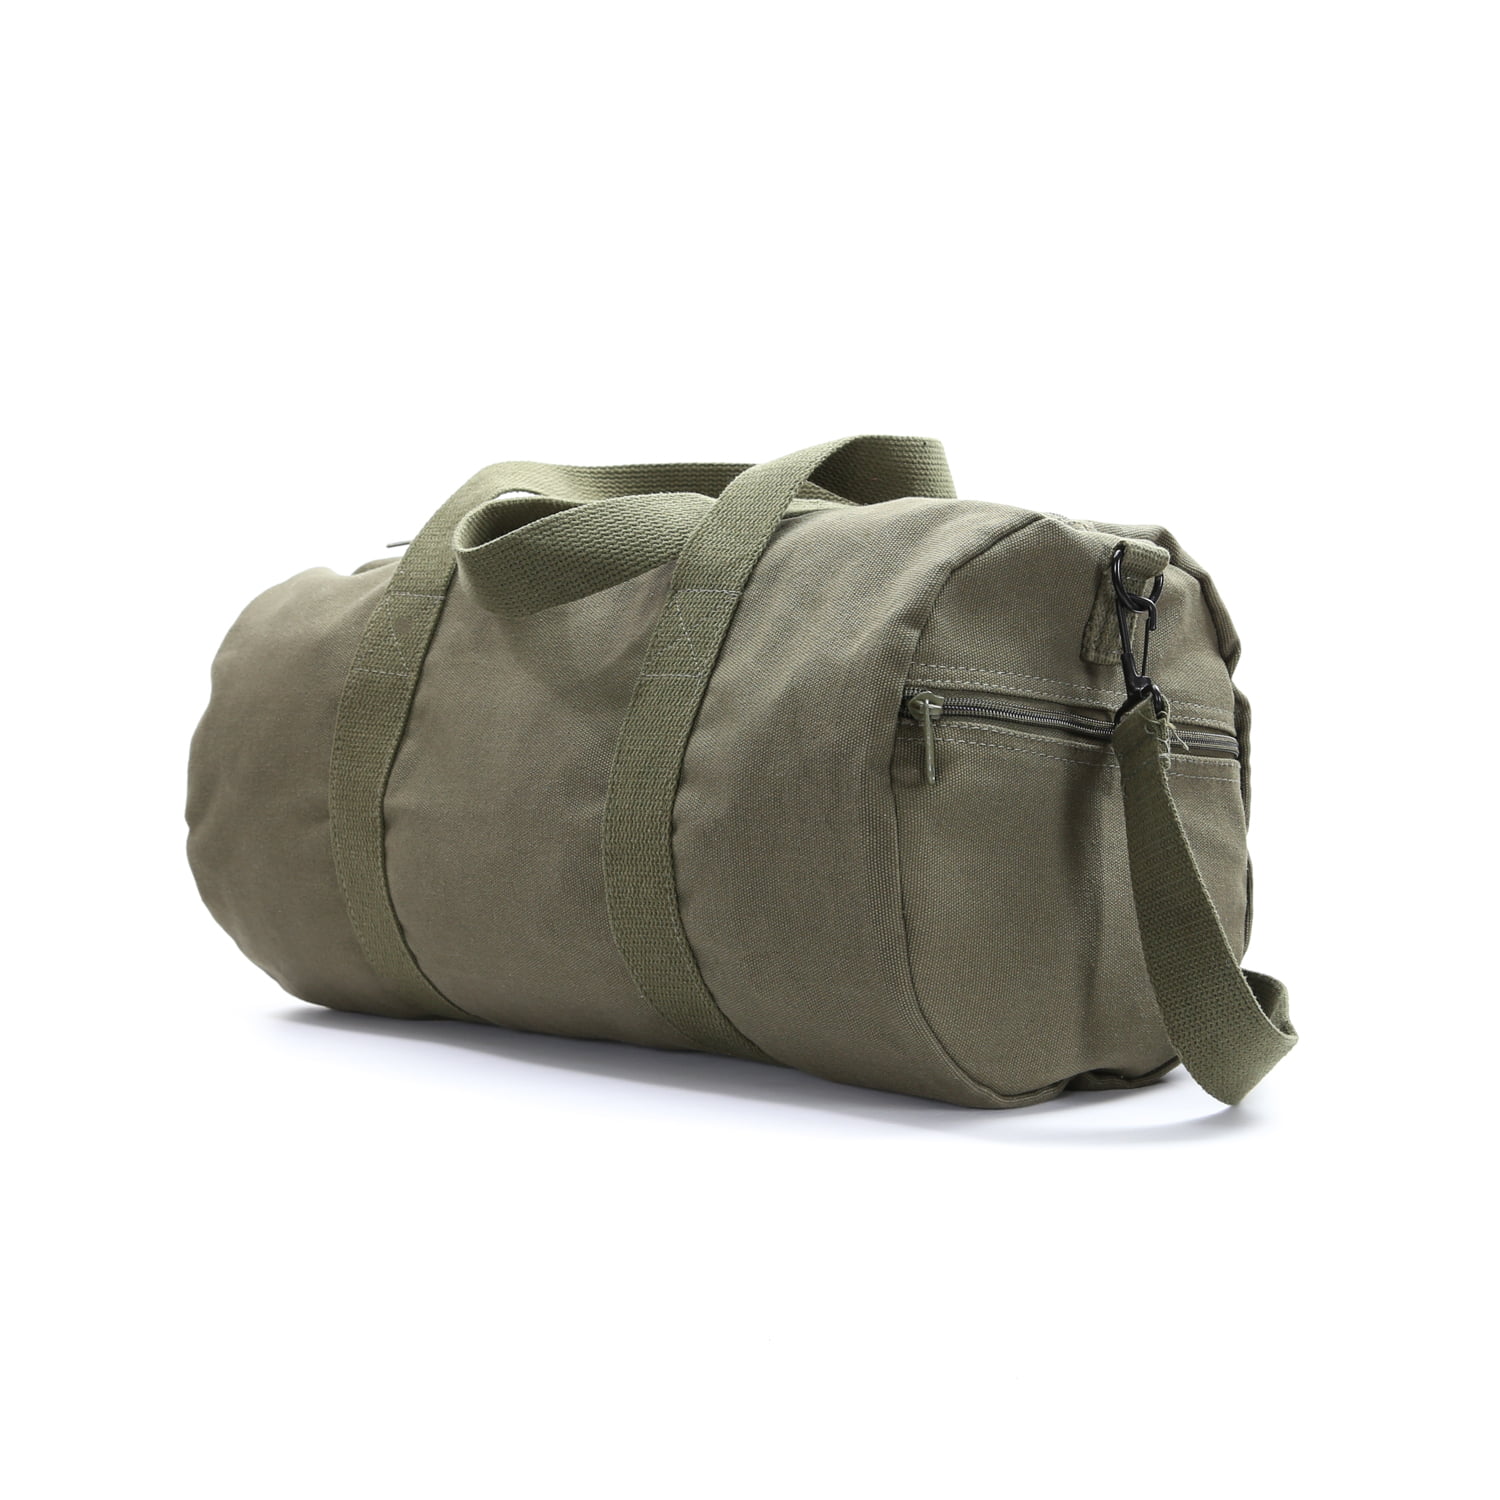  WHITEDUCK Heavy Duty Canvas Duffel Bag for Men and Women -  Foldable Military Army Style Duffel Bag, with Full Length Zipper- Outdoors